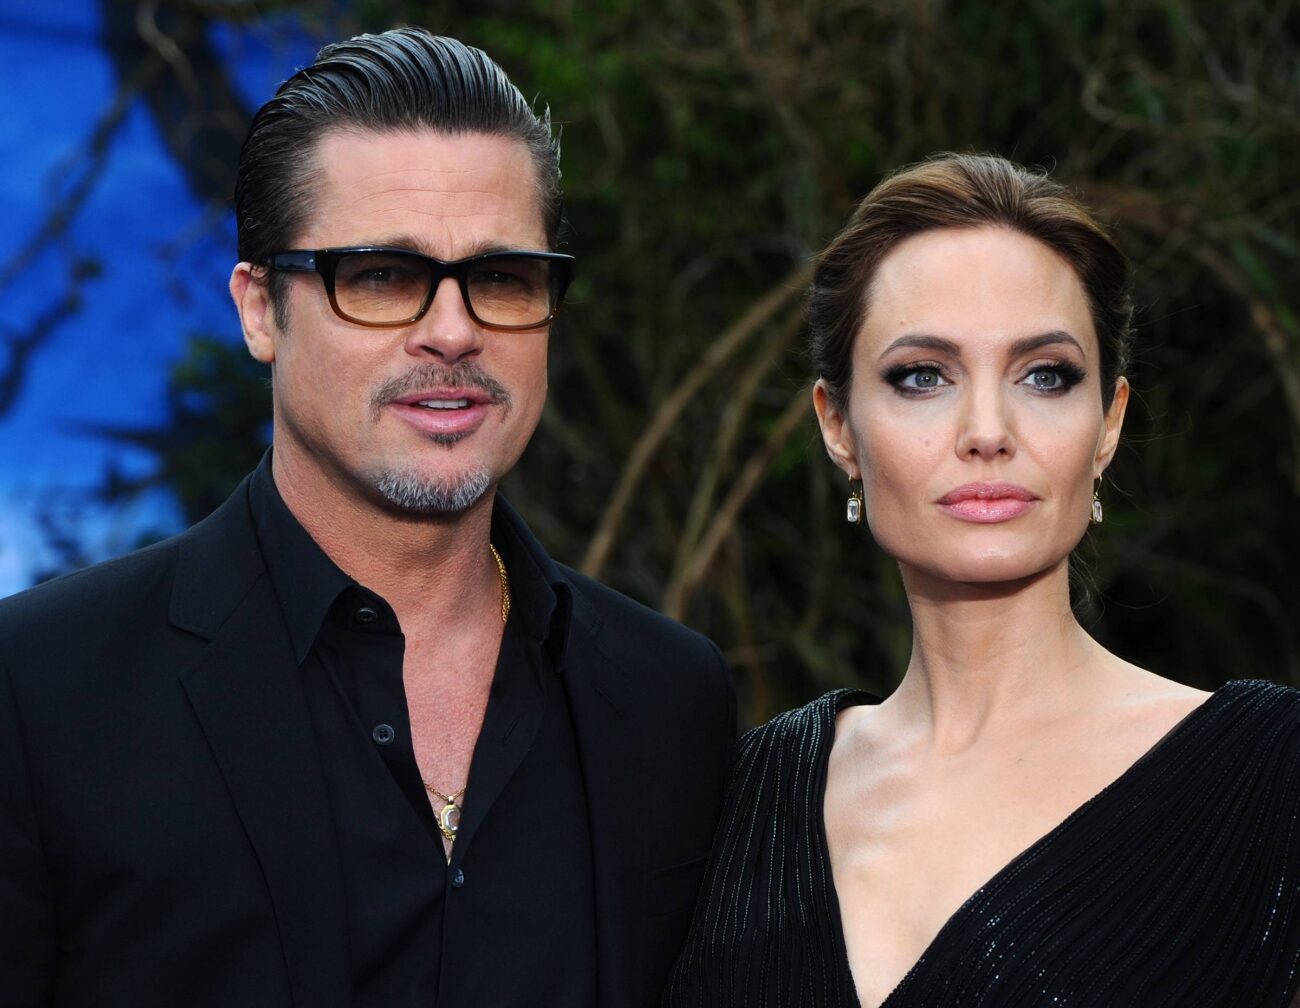 Angelina Jolie and Brad Pitt's divorce battle for custody gets ugly. What do their children have to say about their parents?